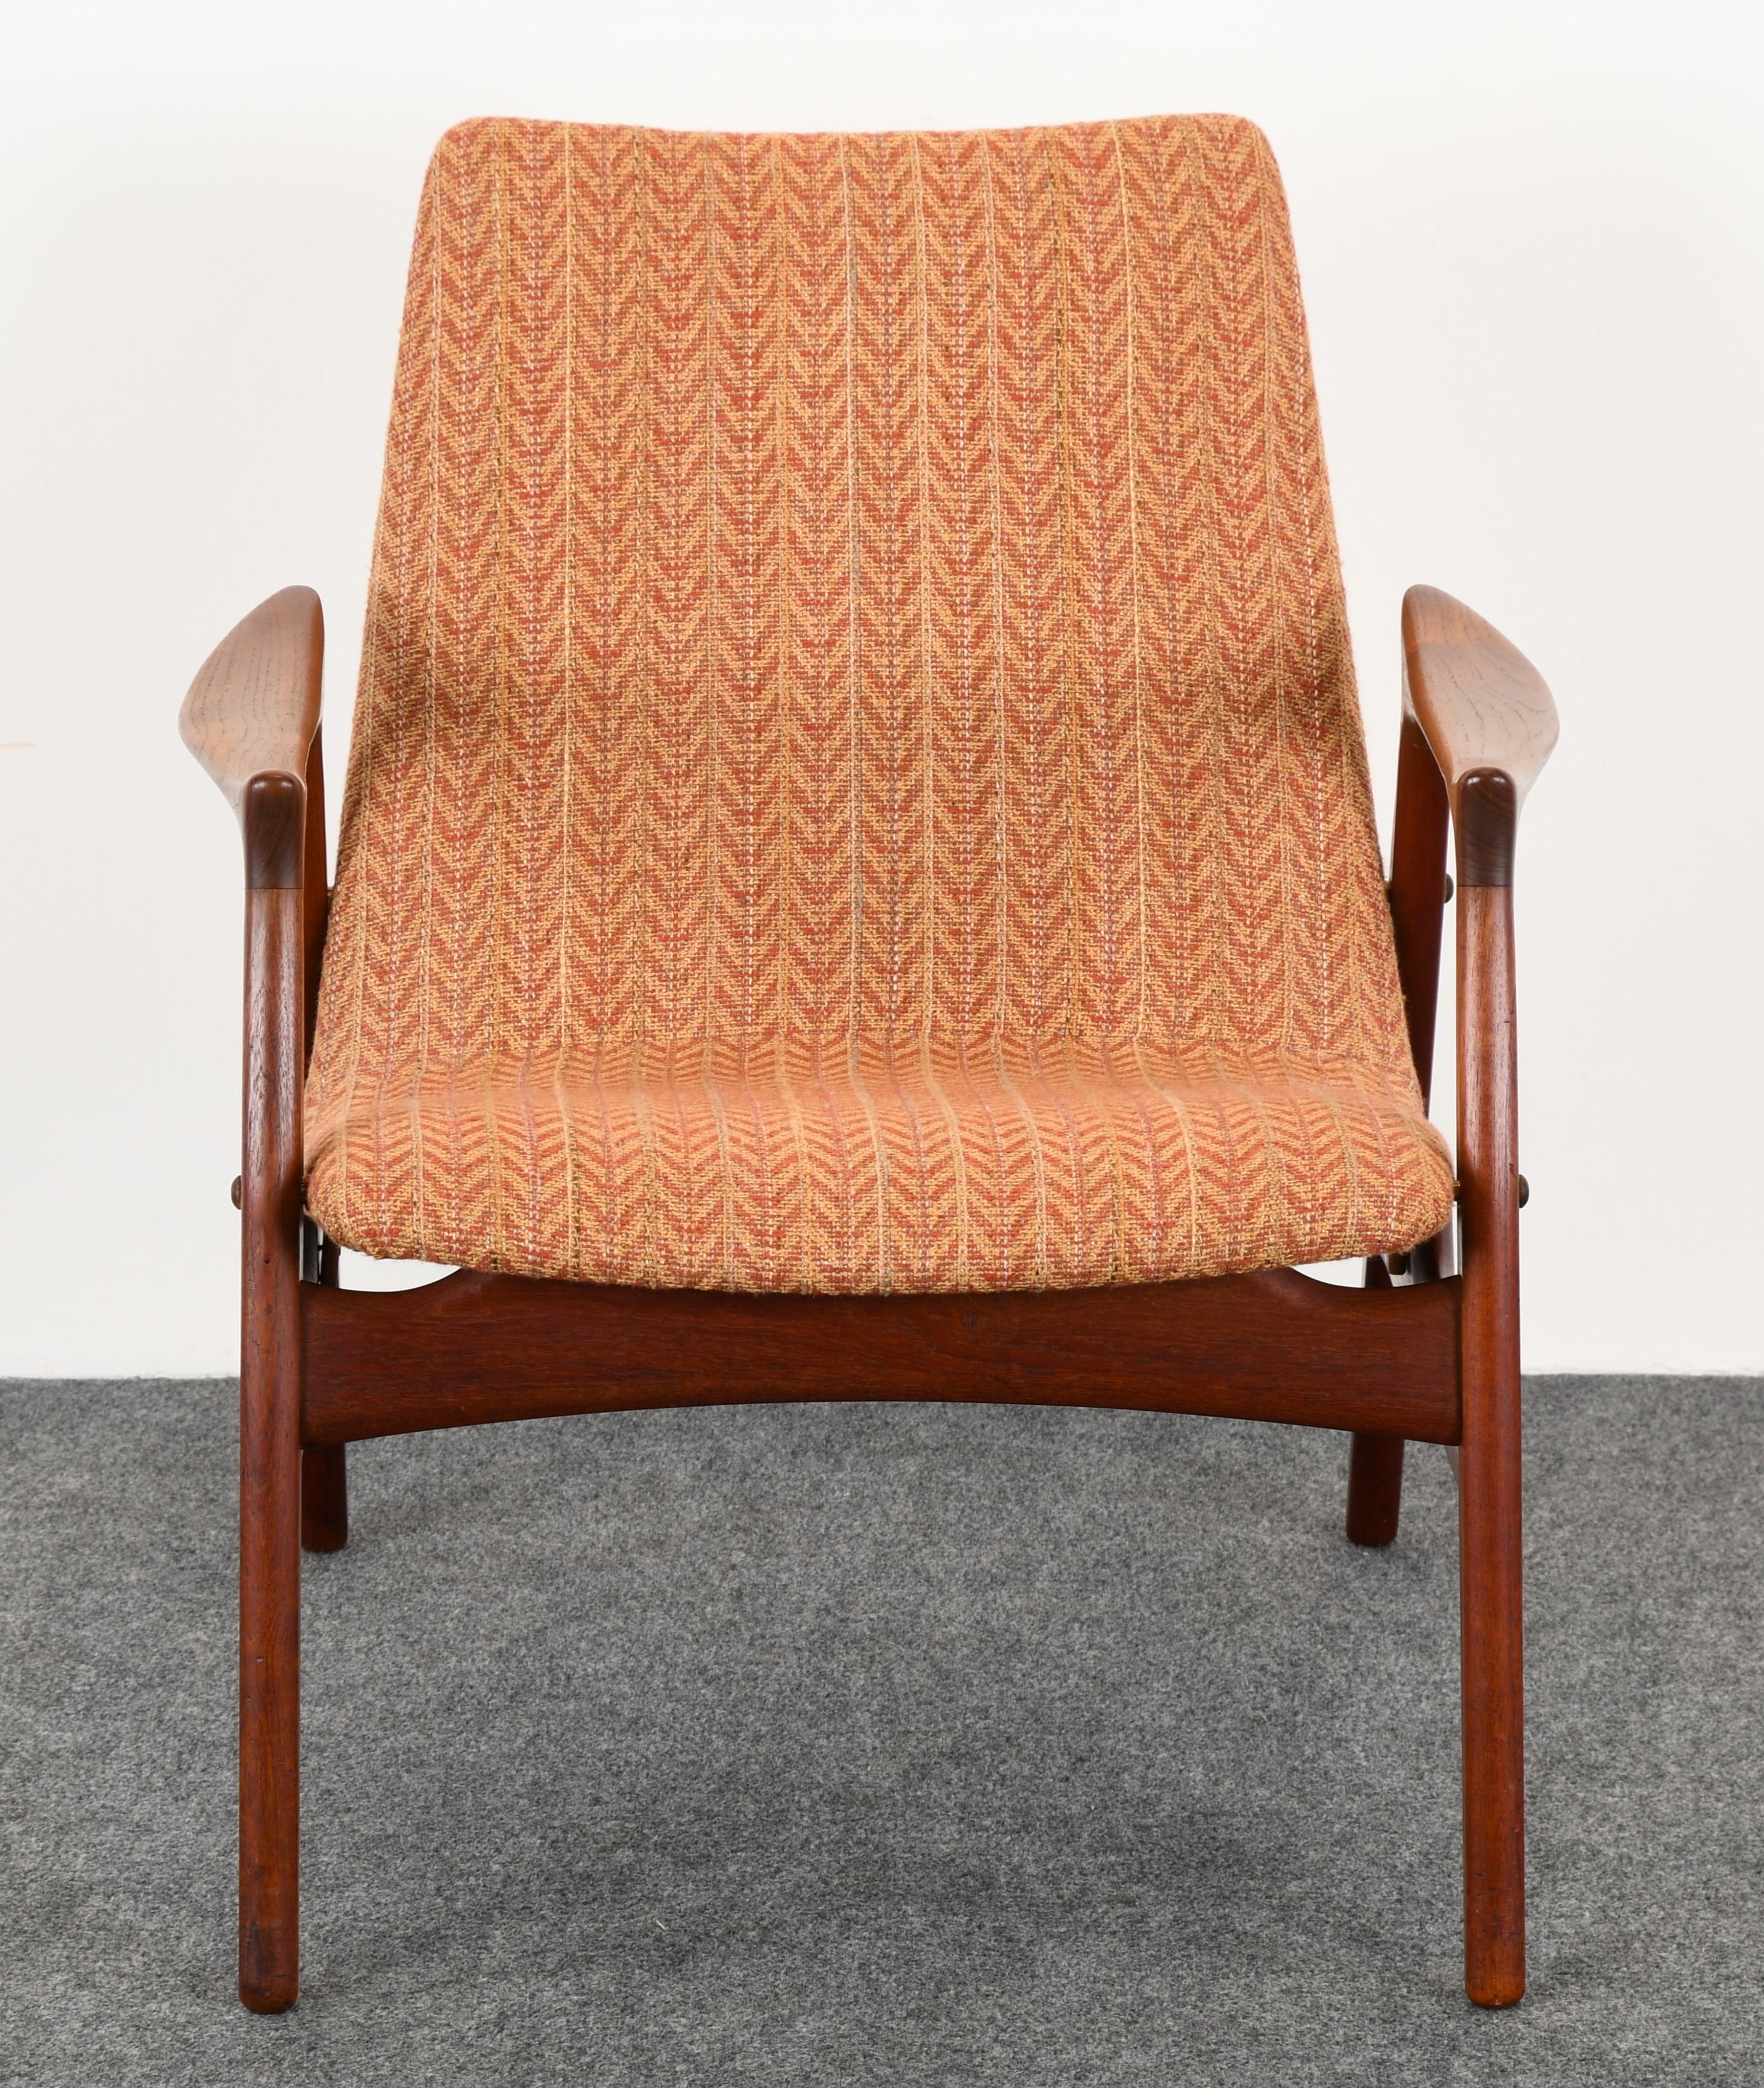 A rare teak easy chair by Arne Hovmand-Olsen for Mogens Kold, 1958. The chair is in very good condition with original fabric. 

Dimensions: 30.5